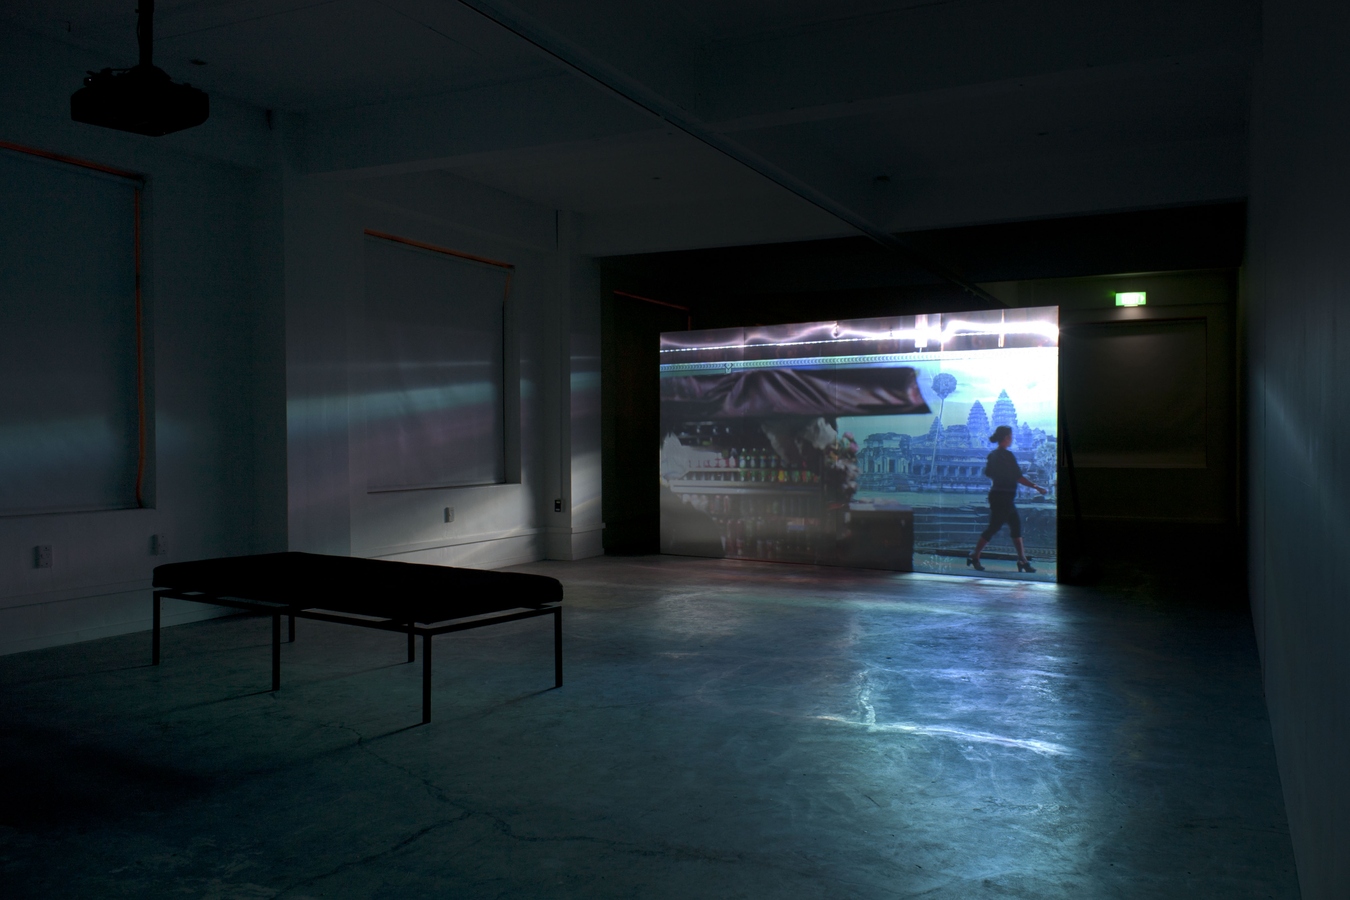 Lim Sokchanlina, Urban Street Night Club, 2013, installation with metal and wooden screen, single-channel video with sound, 16 minutes 16 seconds. Photo: Daegan Wells